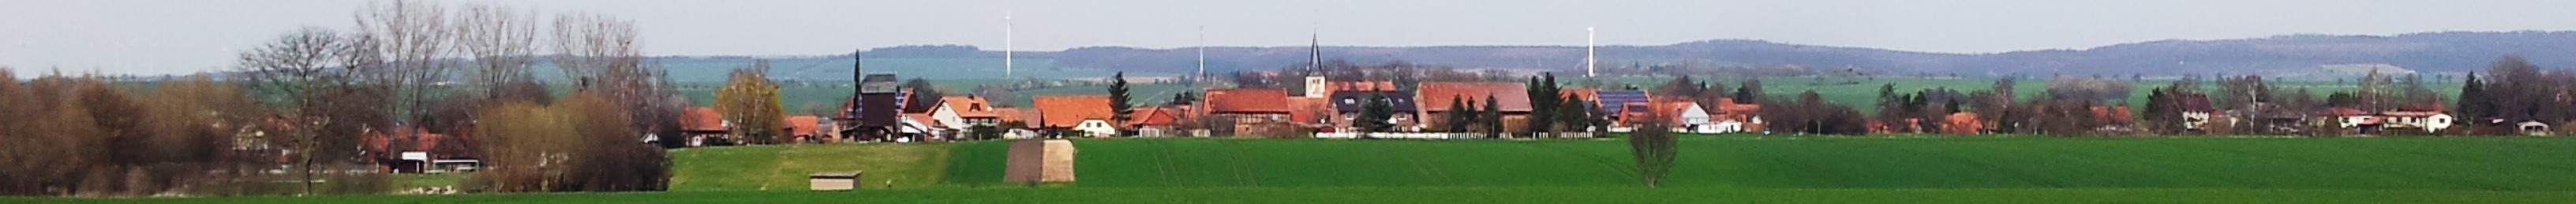 Panorama Danstedt